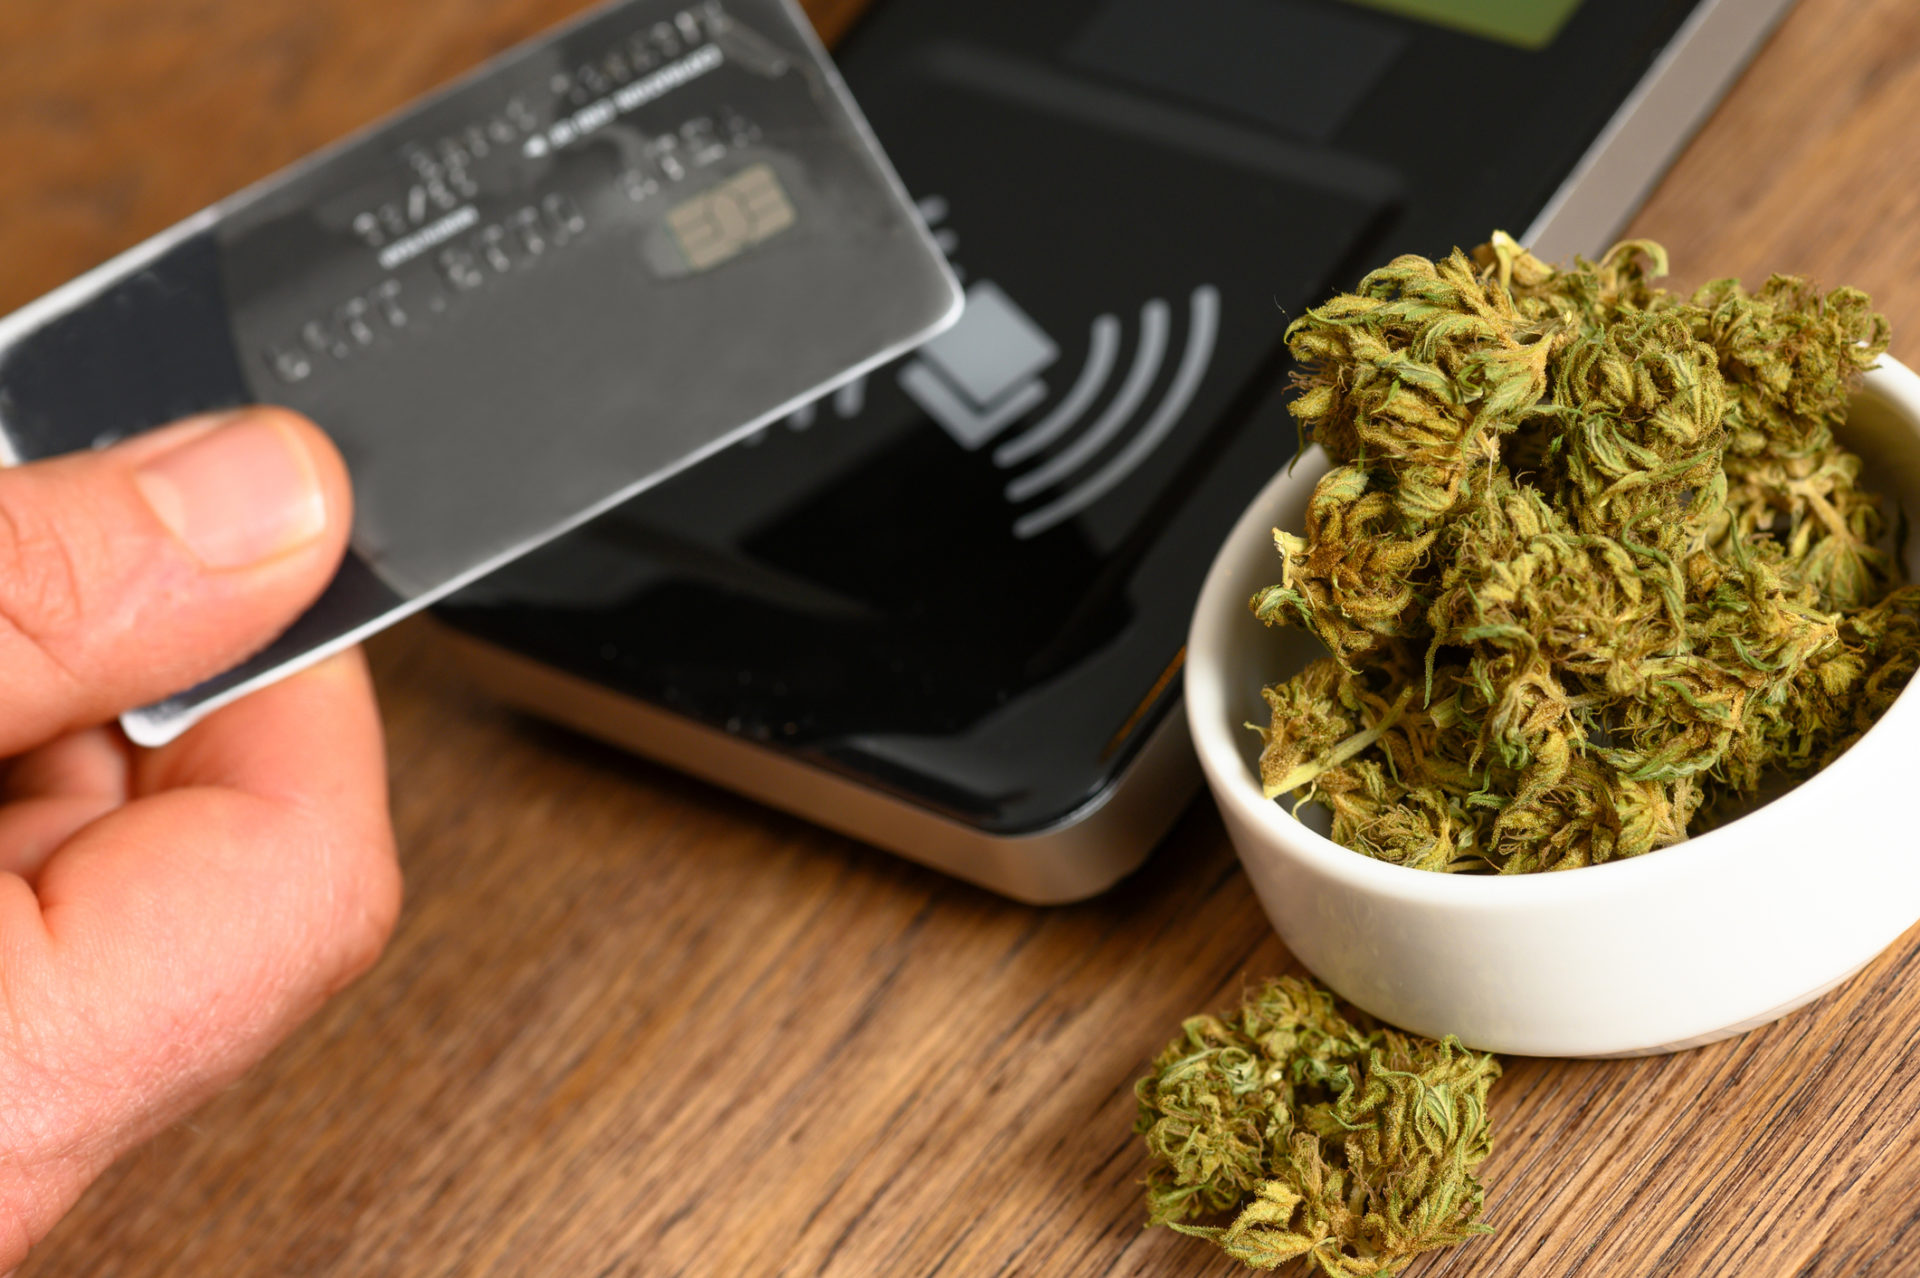 Data Security Demonstrated In The Cannabis Industry